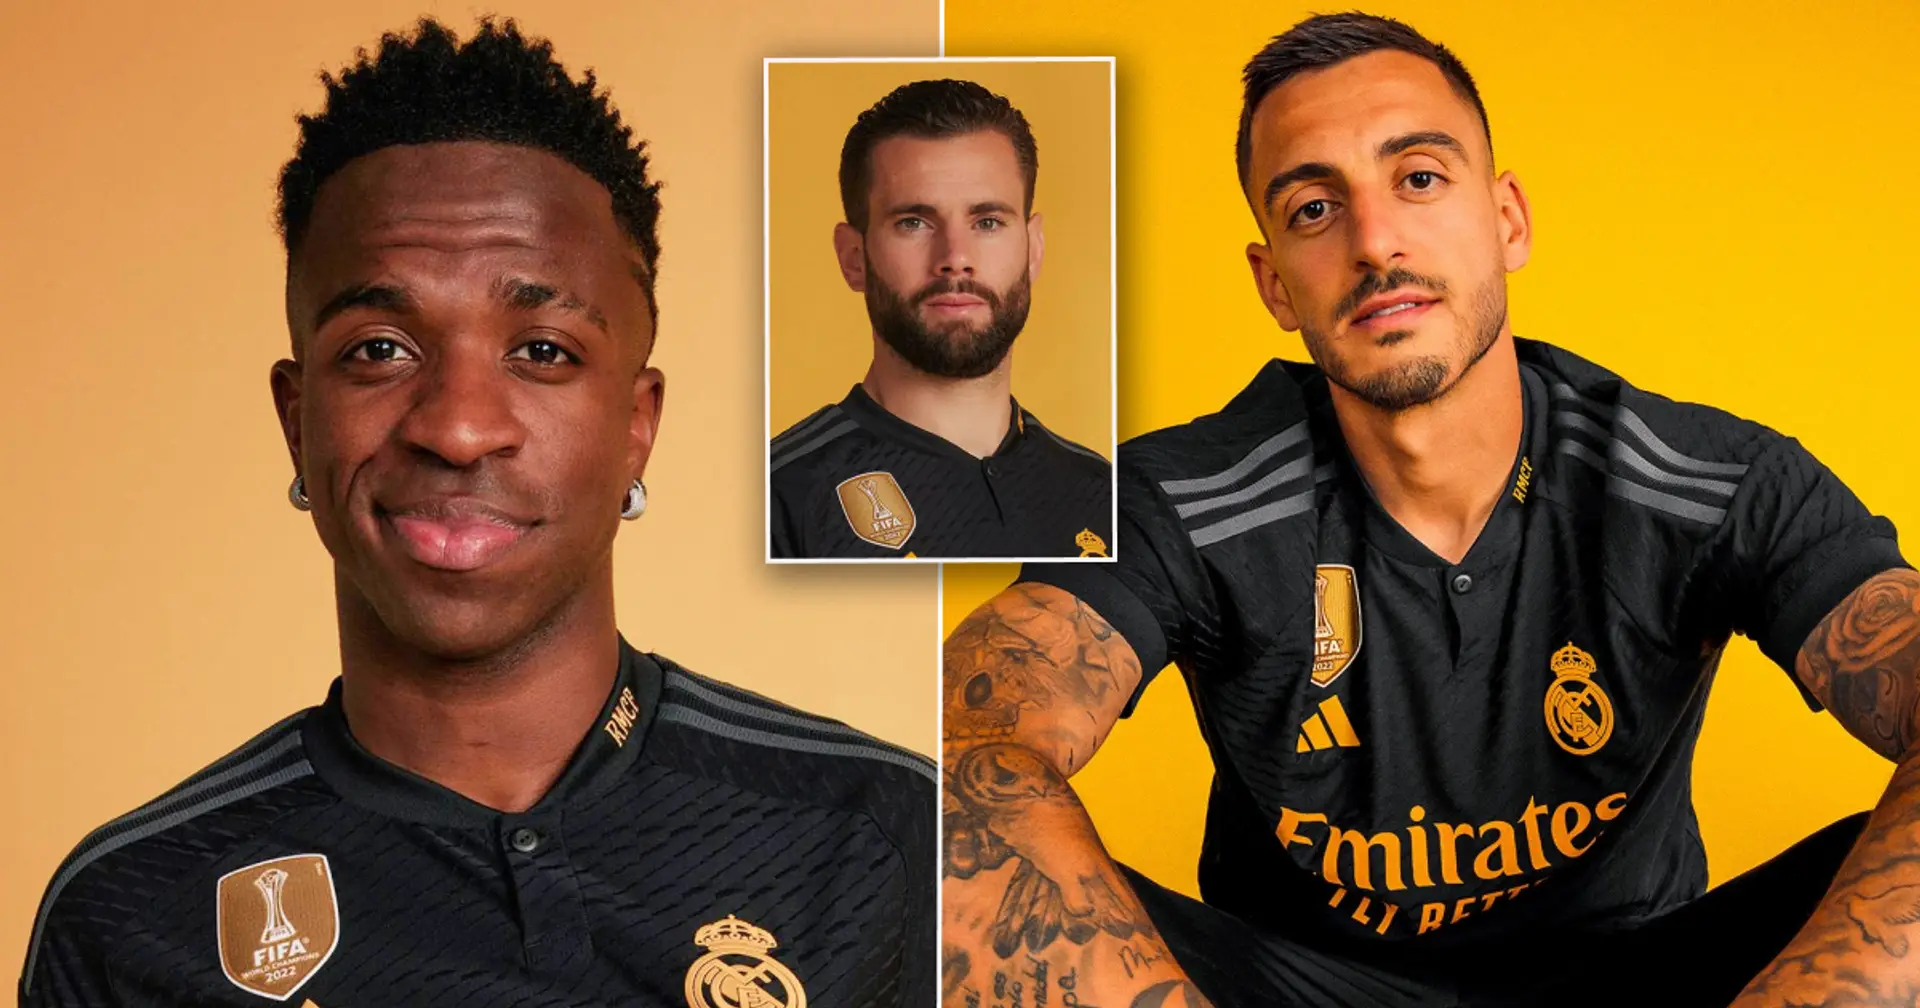 12 best pics of Real Madrid players in new third kit